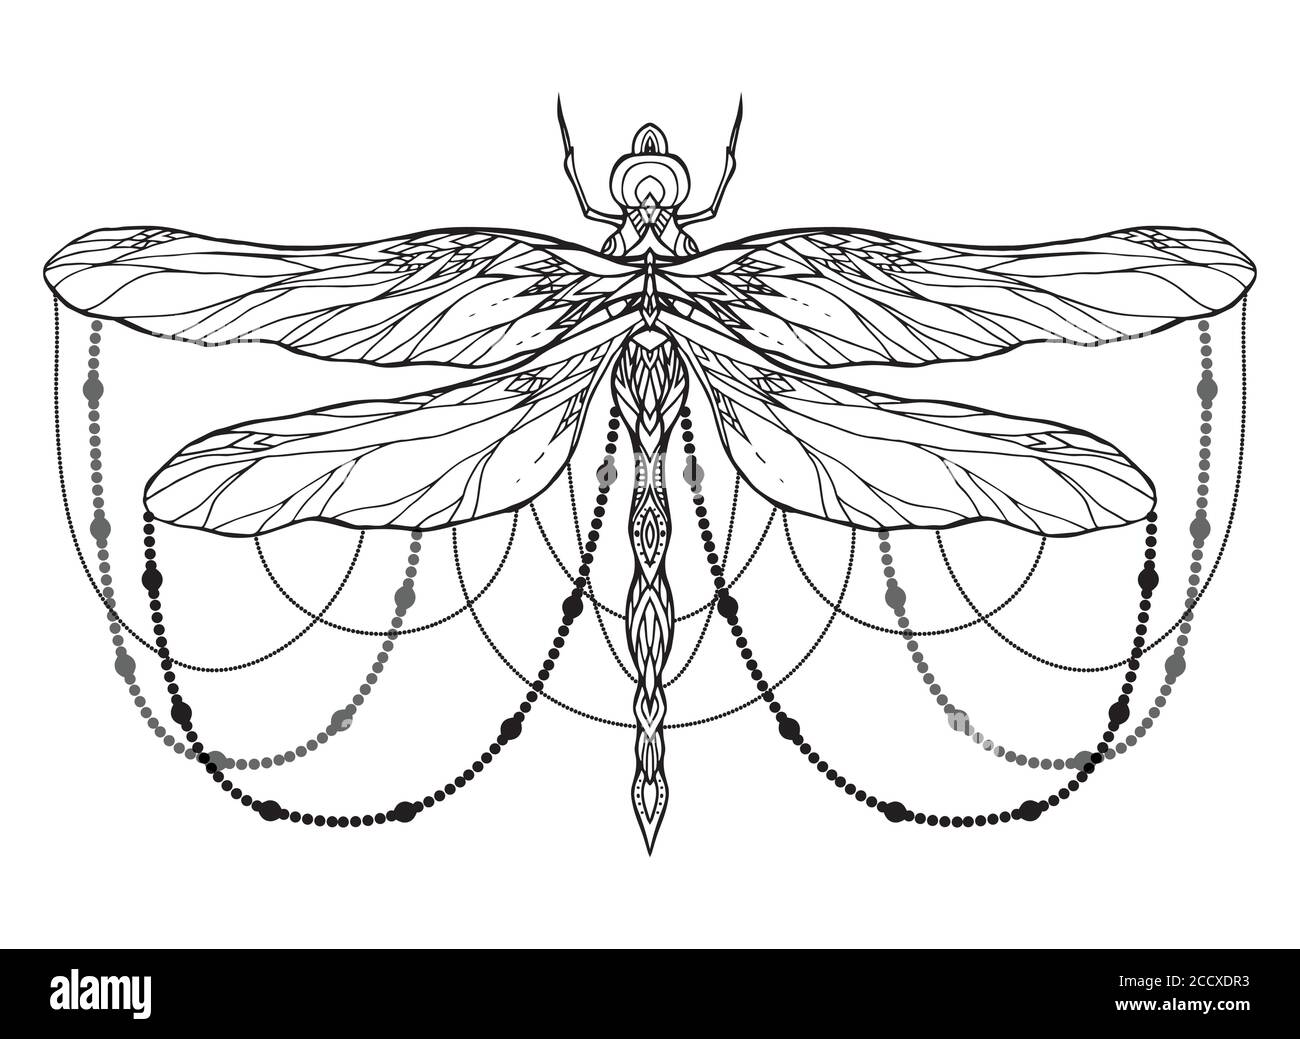 Black and white dragonfly illustration with boho pattern and beads. Vector element for sketching tattoos, printing on T-shirts, postcards and your cre Stock Vector